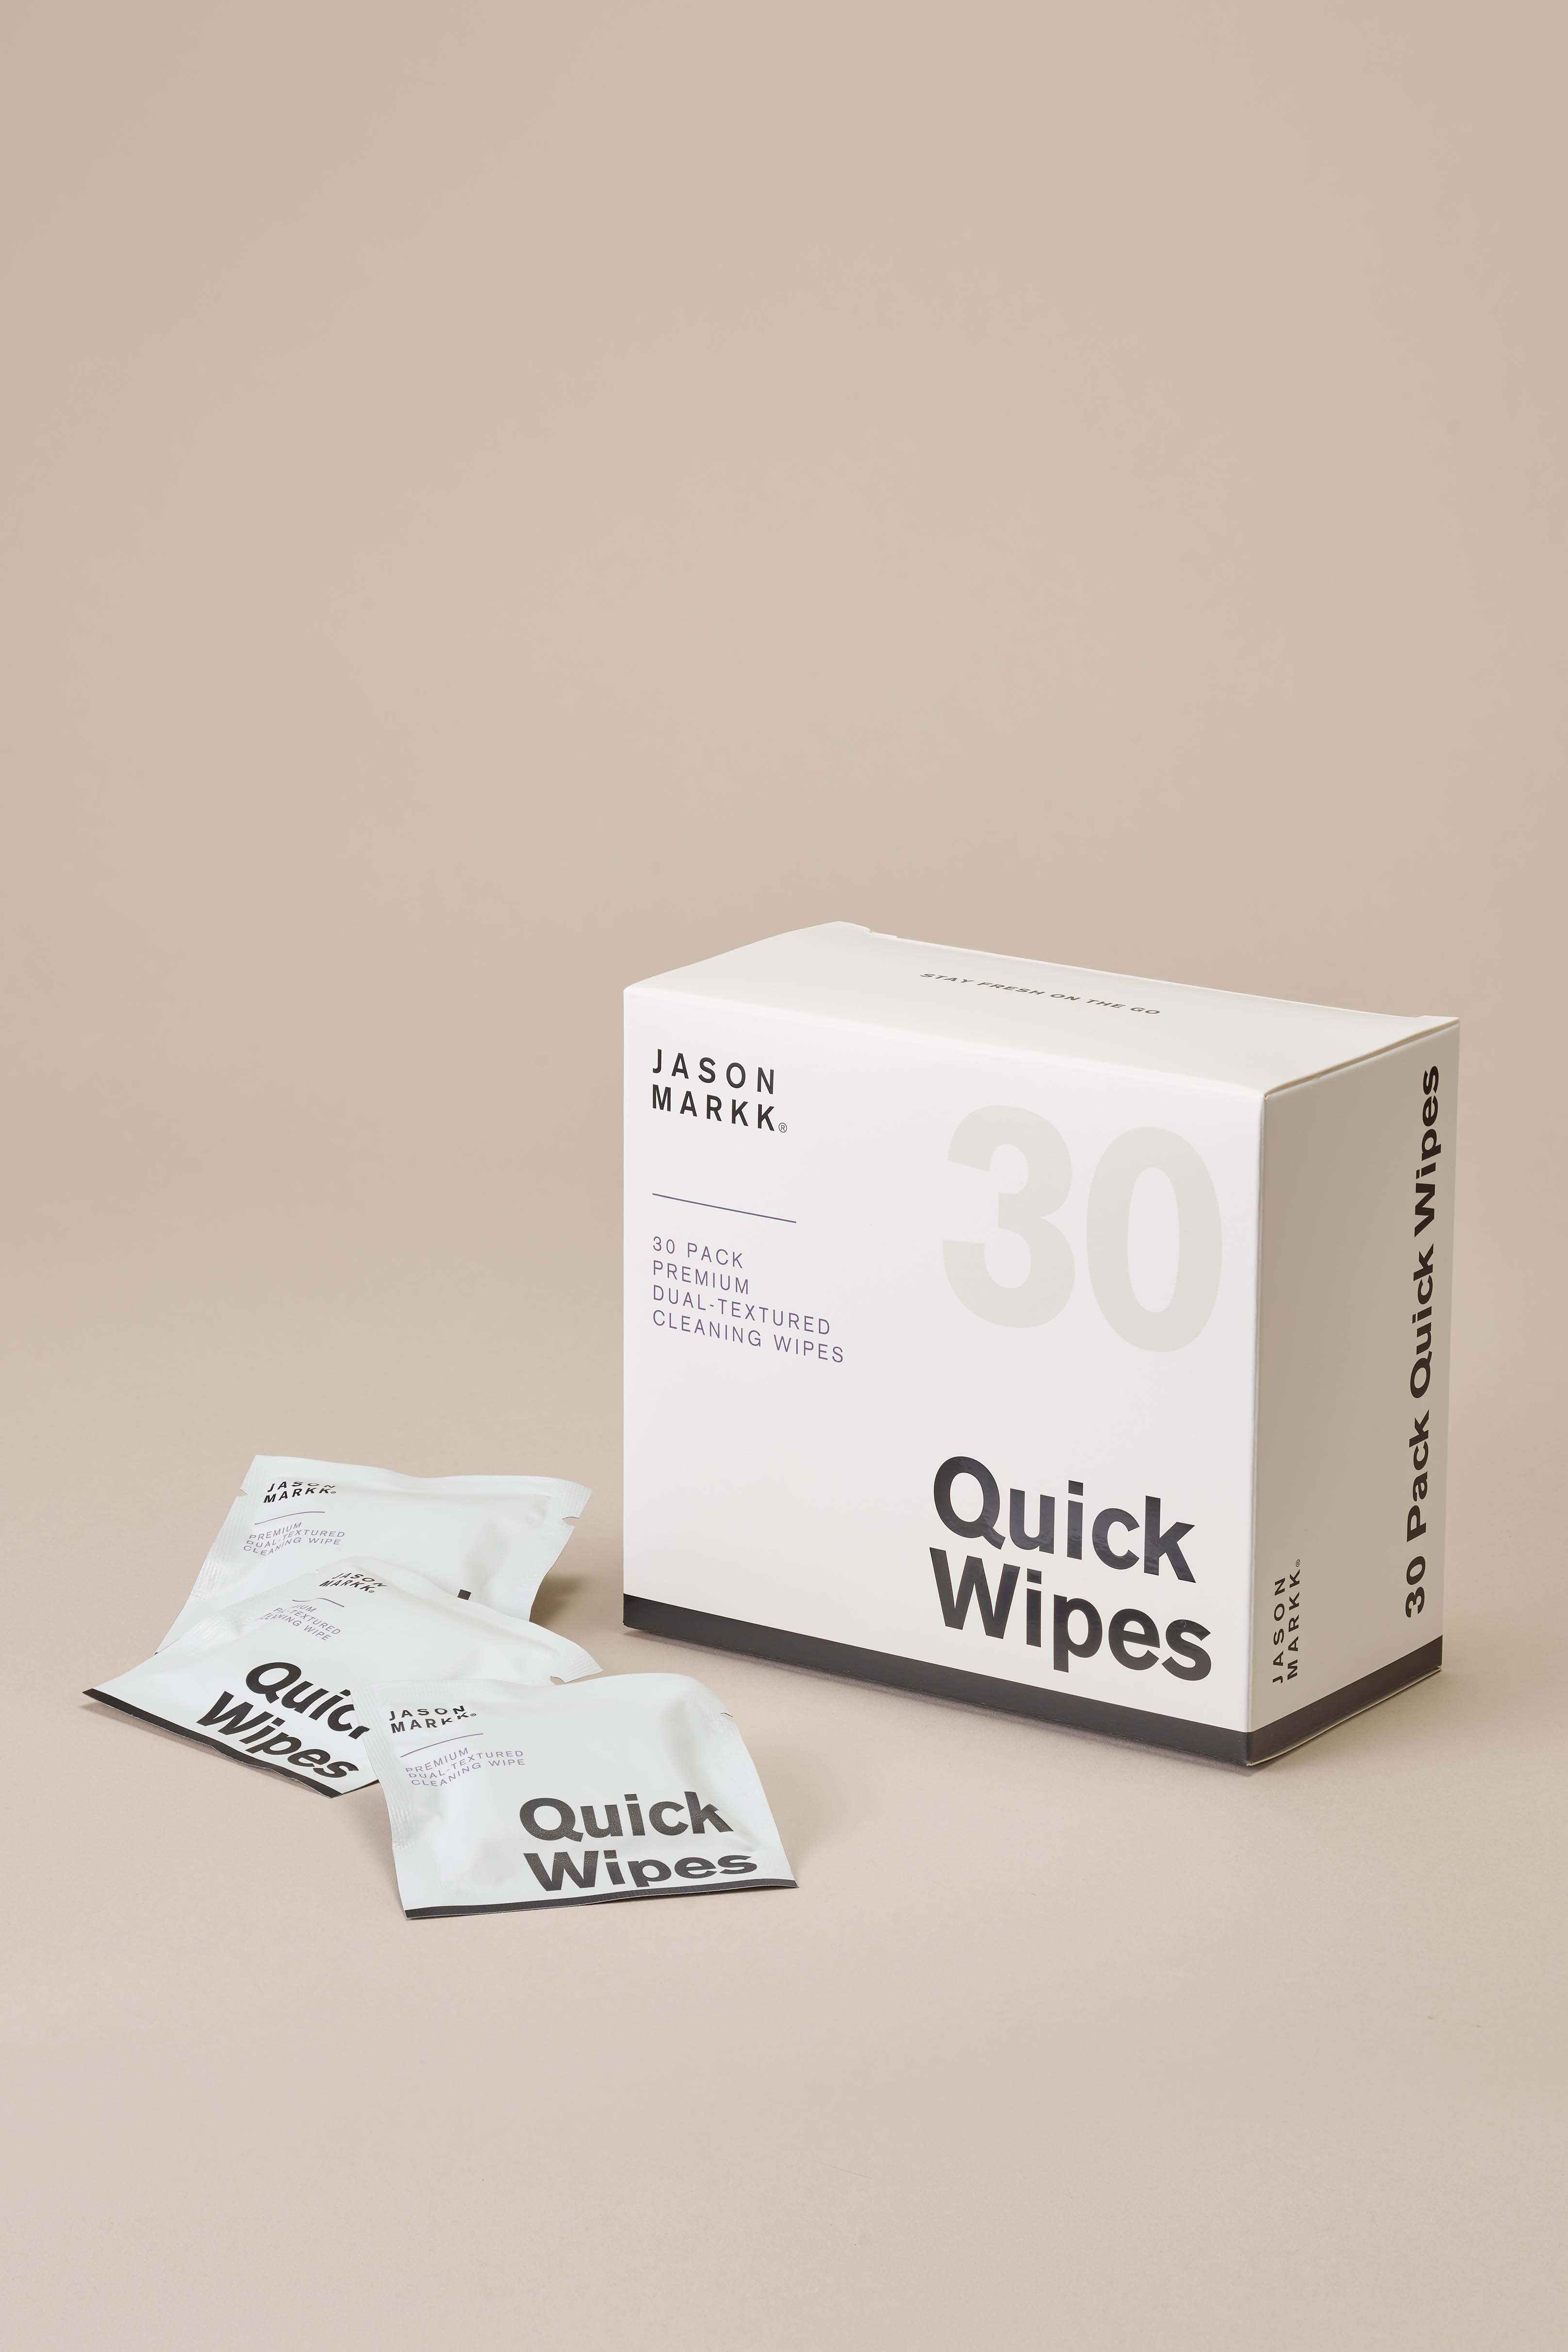 Rubber Goods Cleaning Wipes